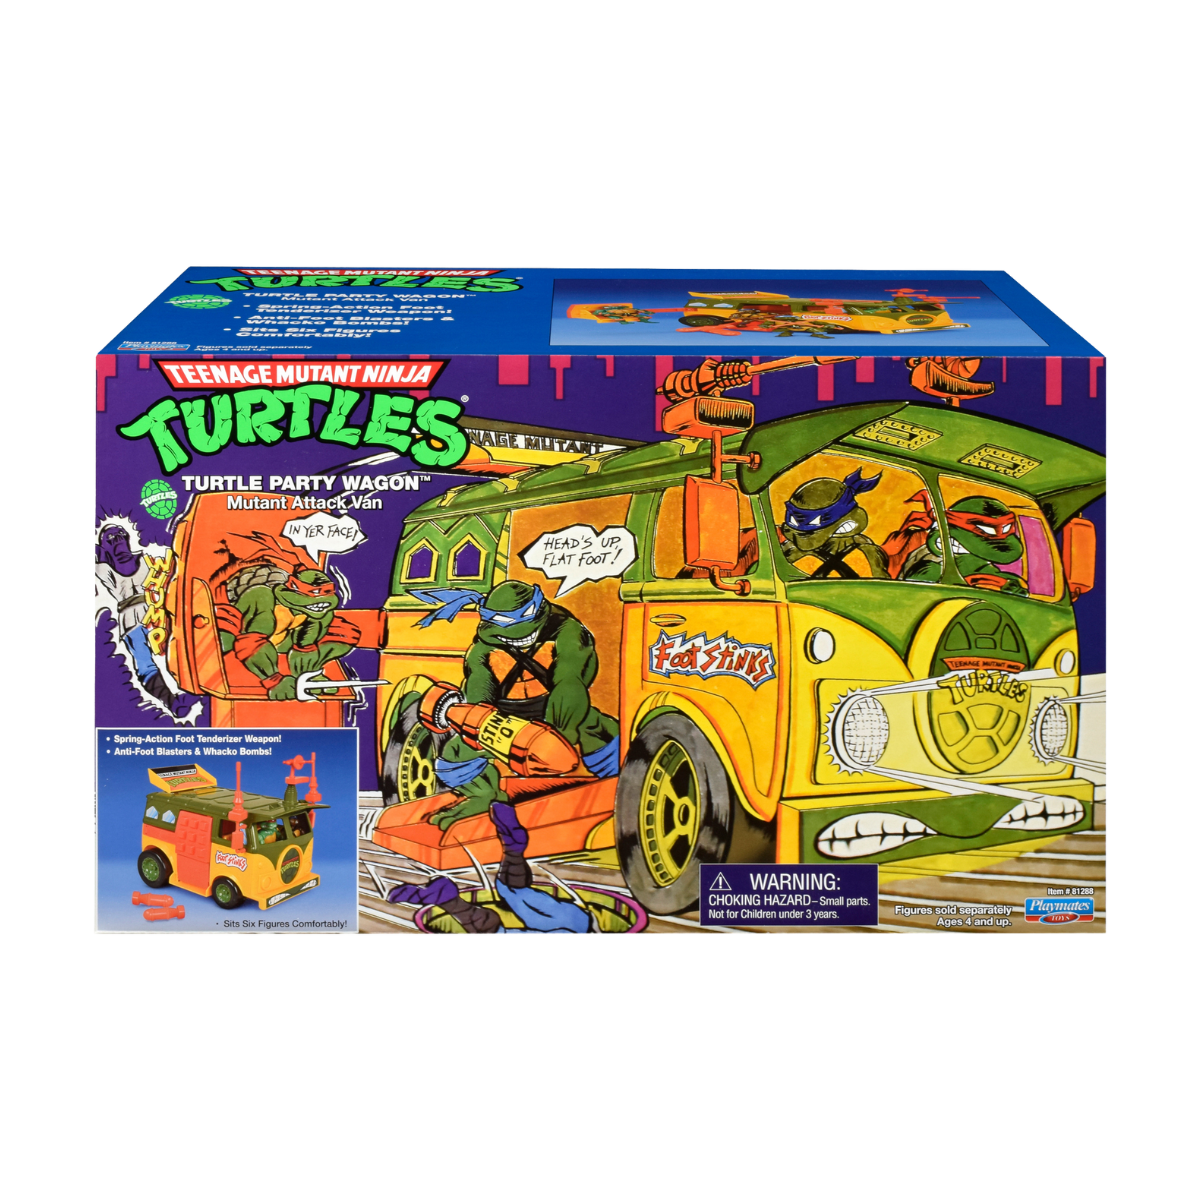 Turtle Party Wagon